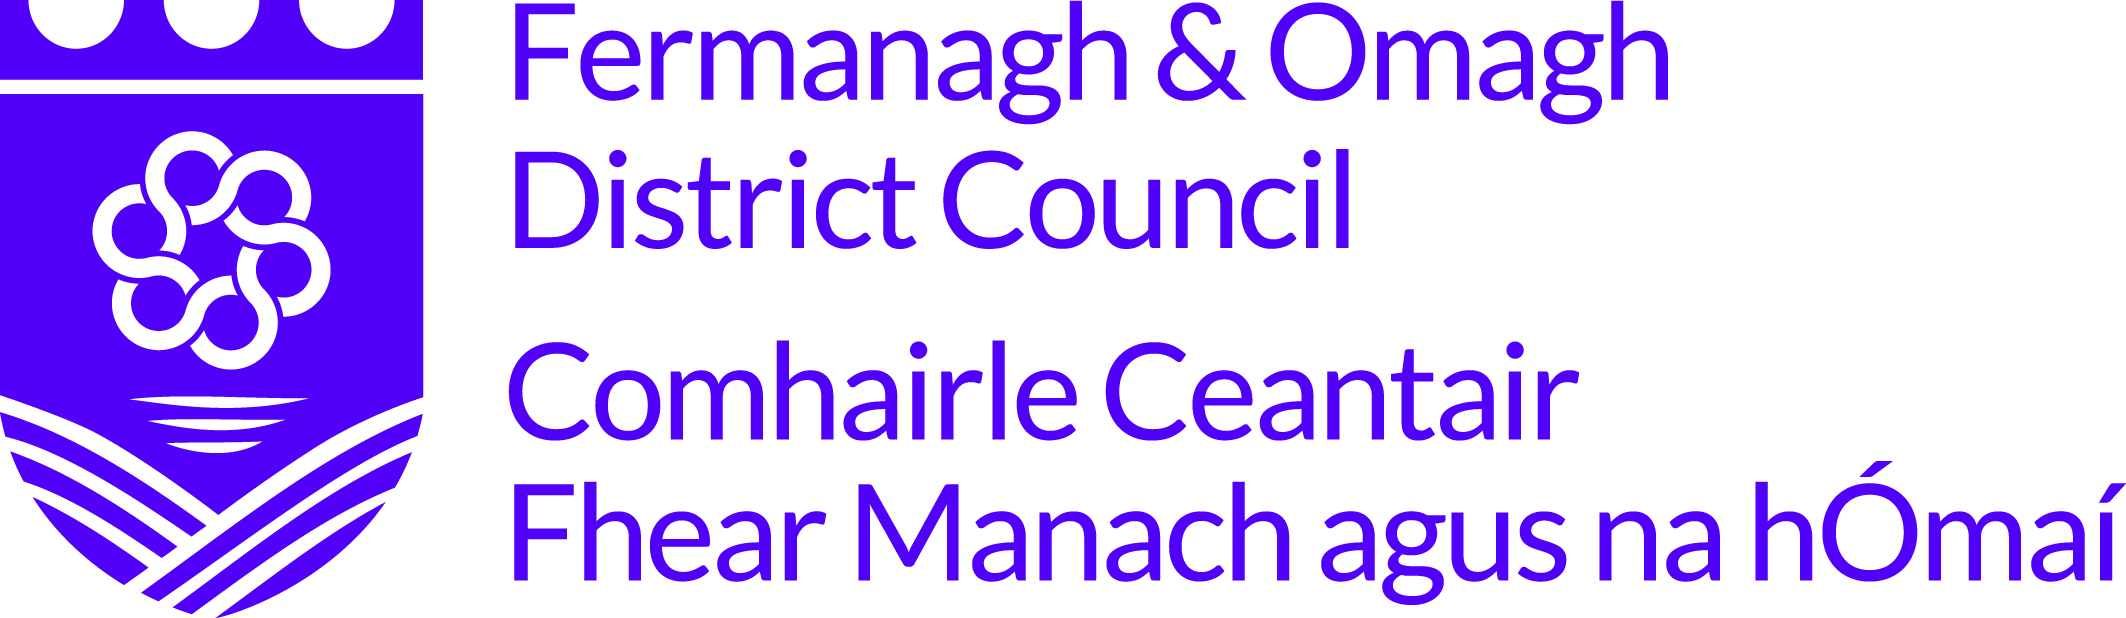 Fermananagh and Omagh DC